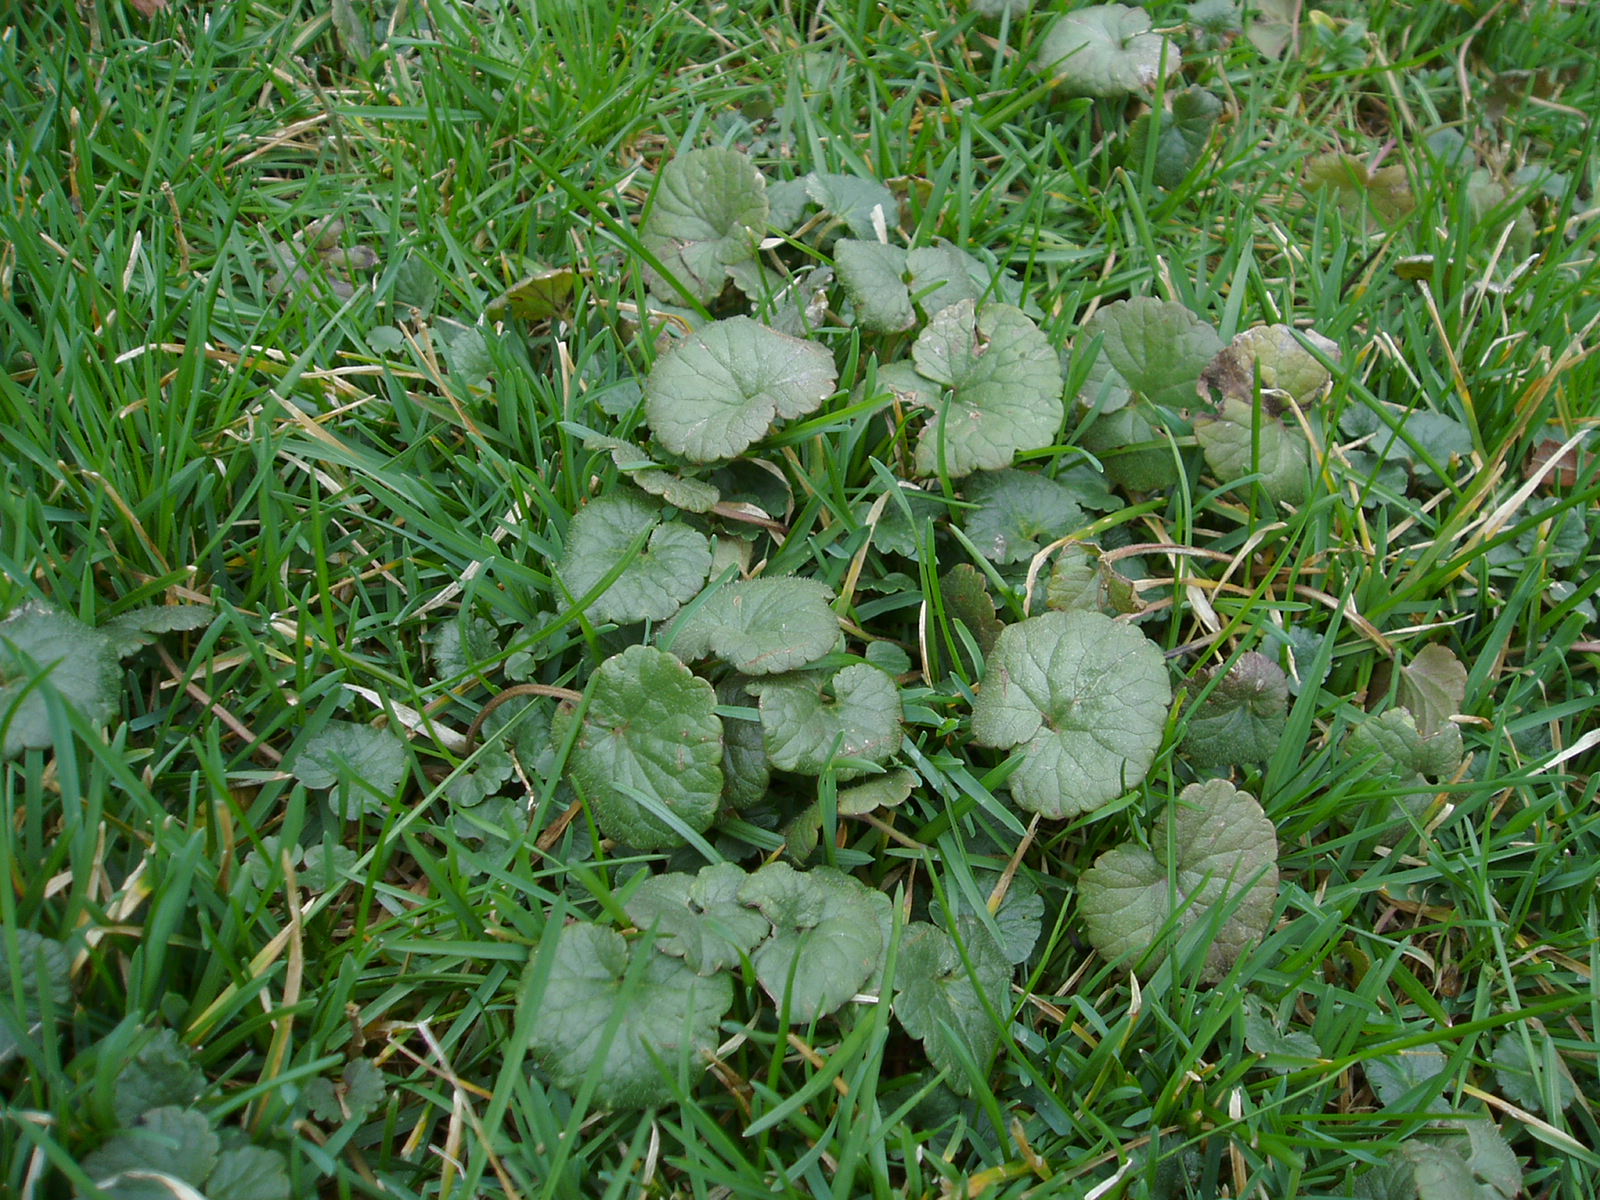 Creeping Charlie- a lawn care problem and pest